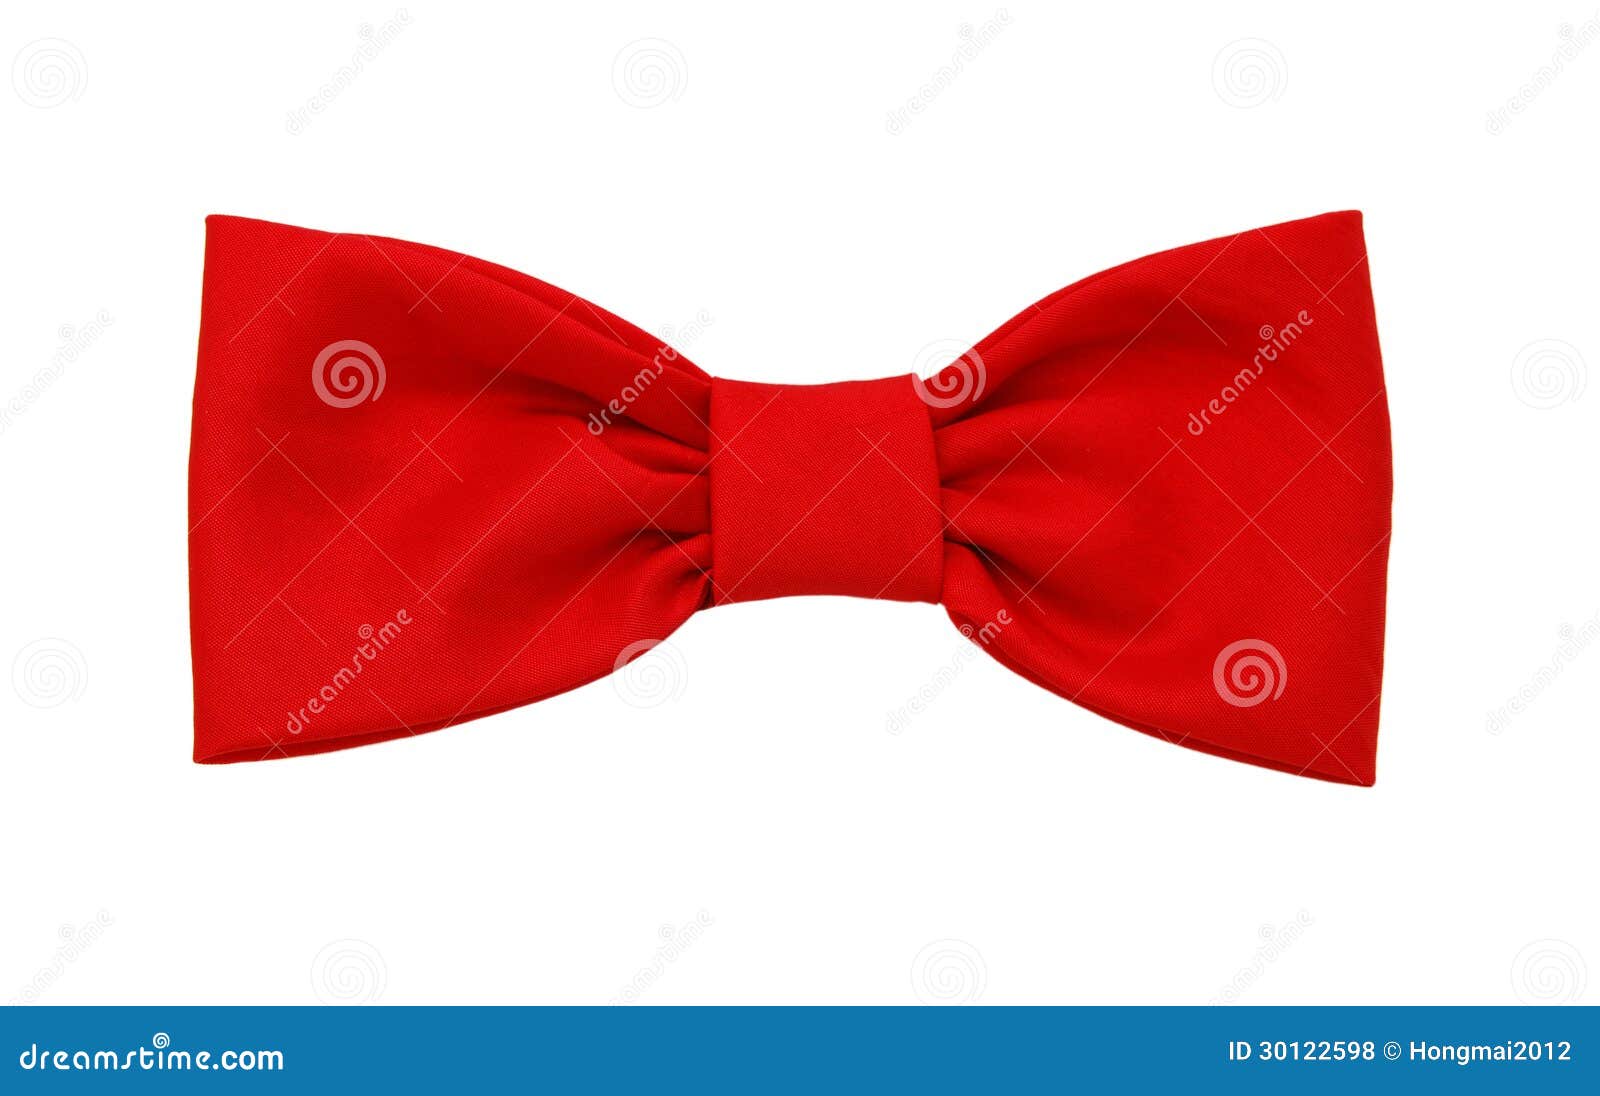 red bow tie